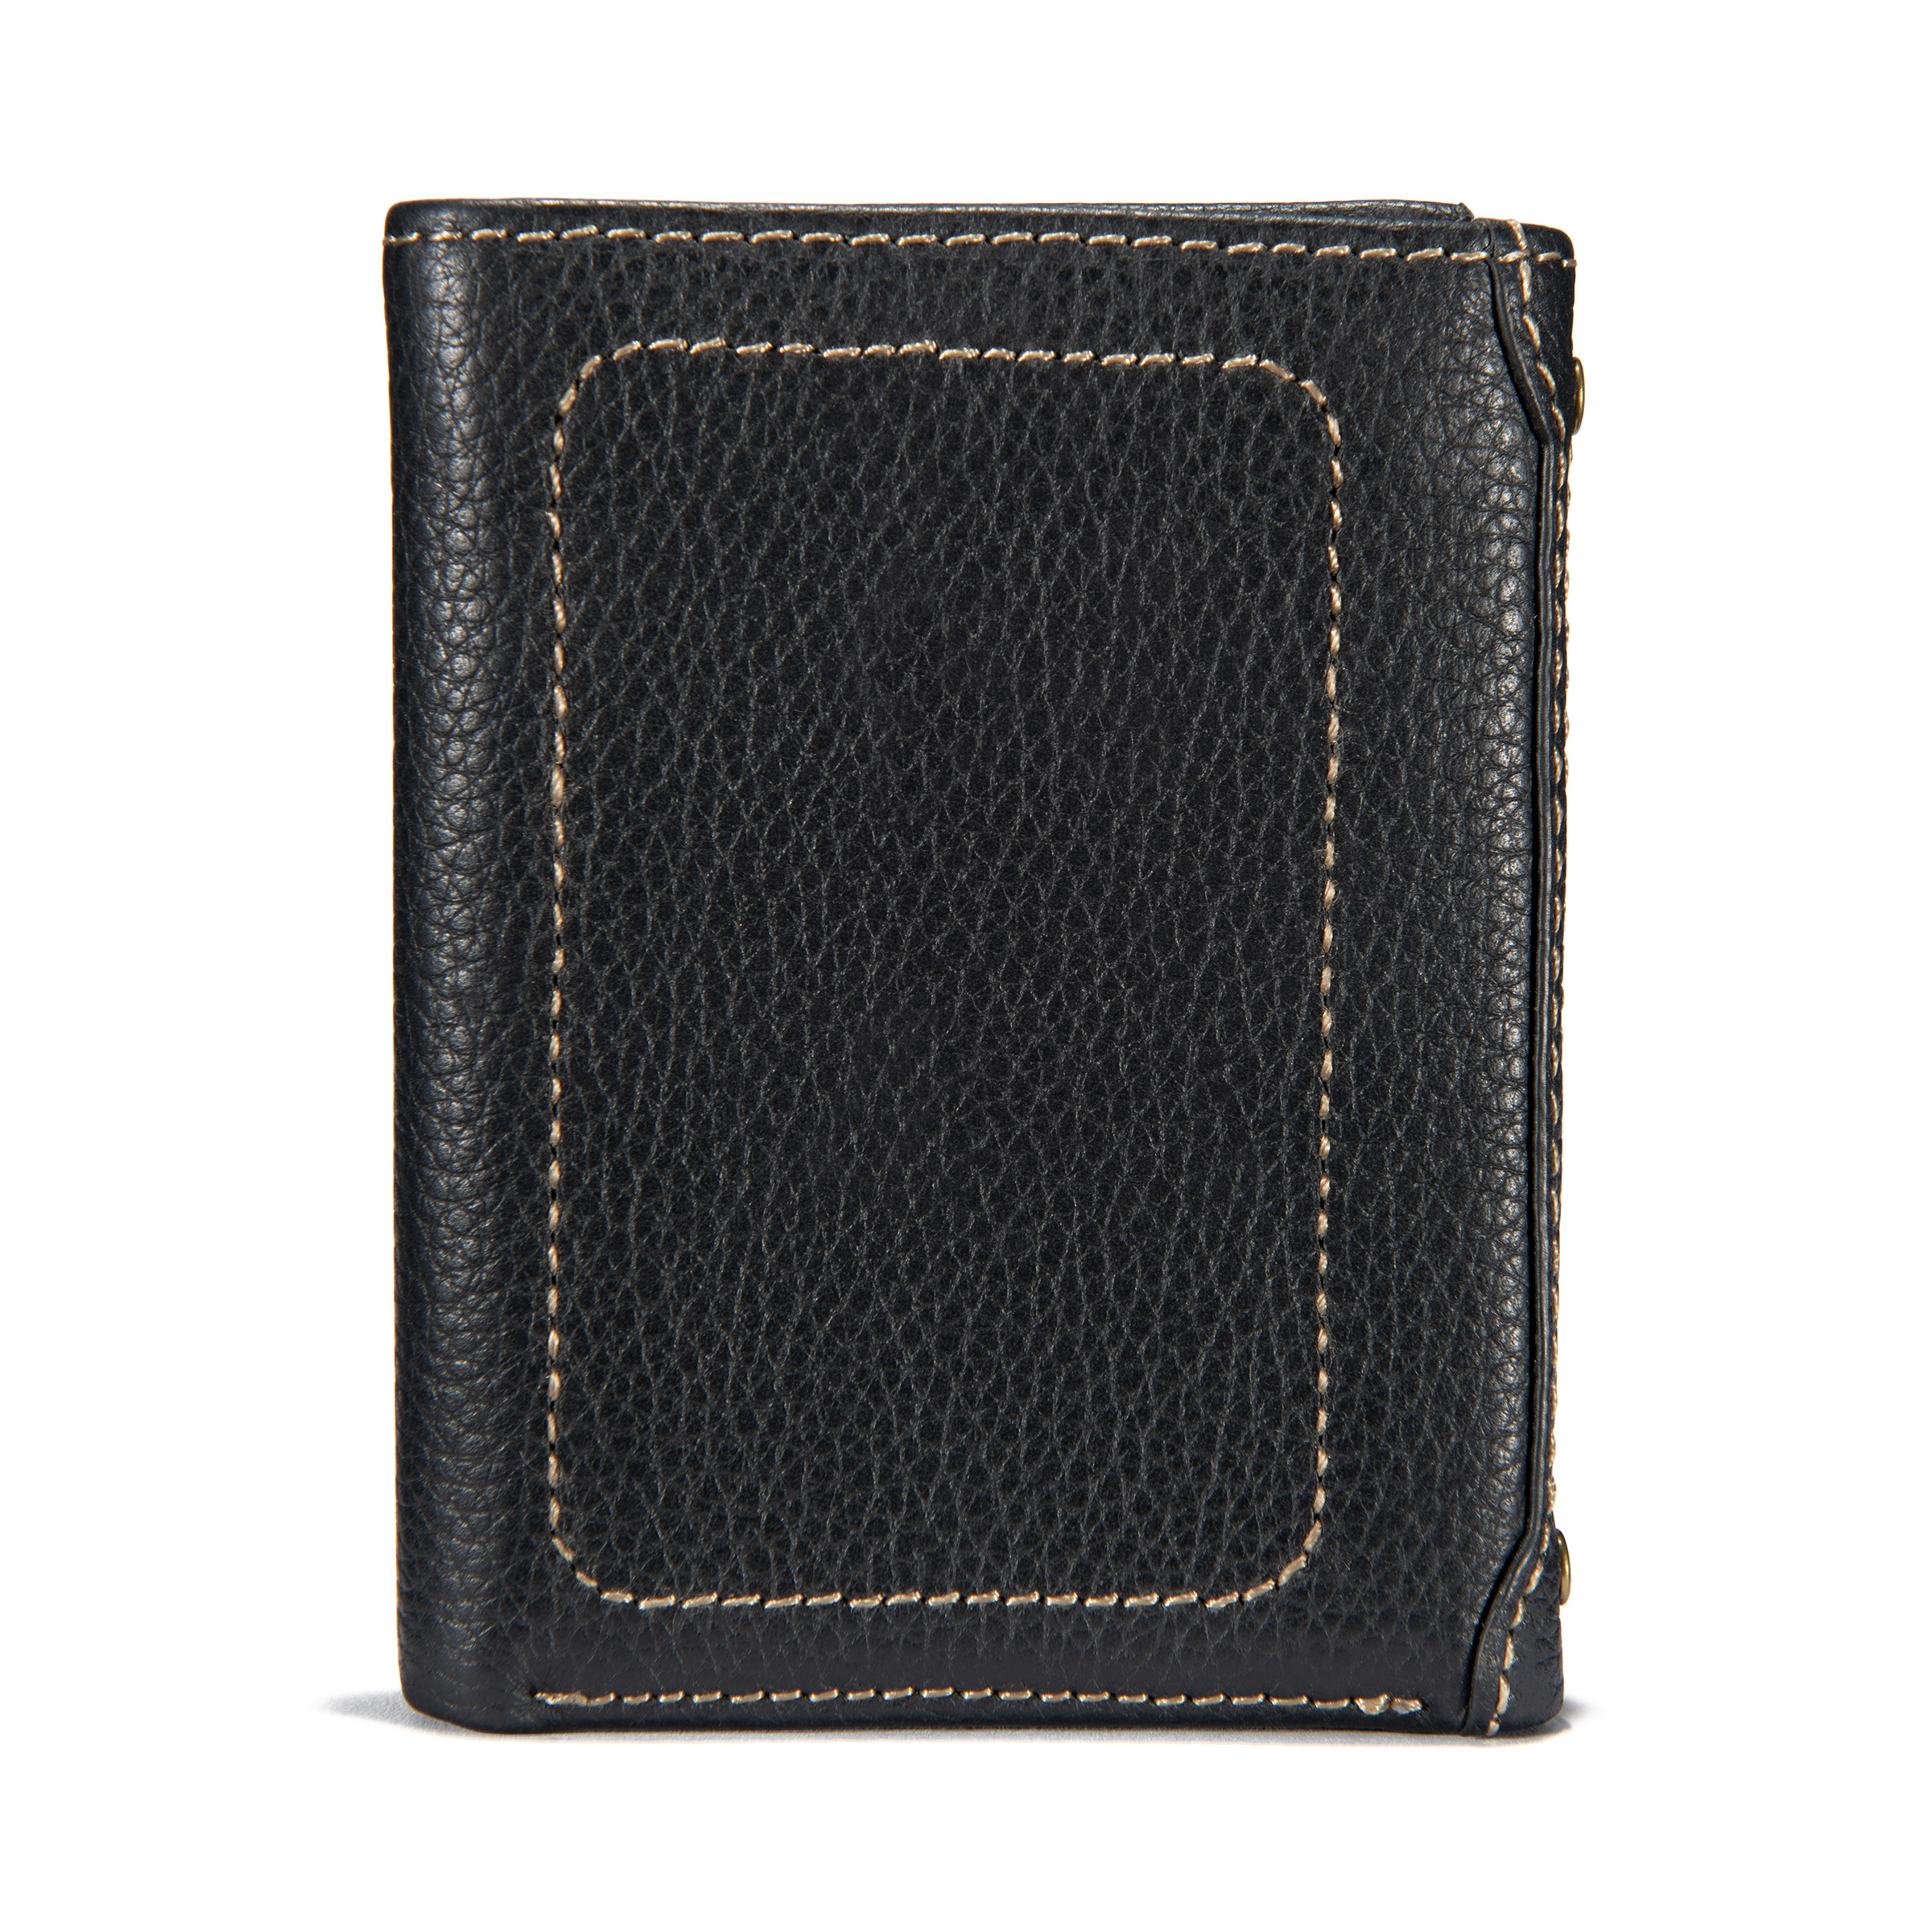 Picture of Carhartt B0000209 Mens Pebble Leather Trifold Wallet